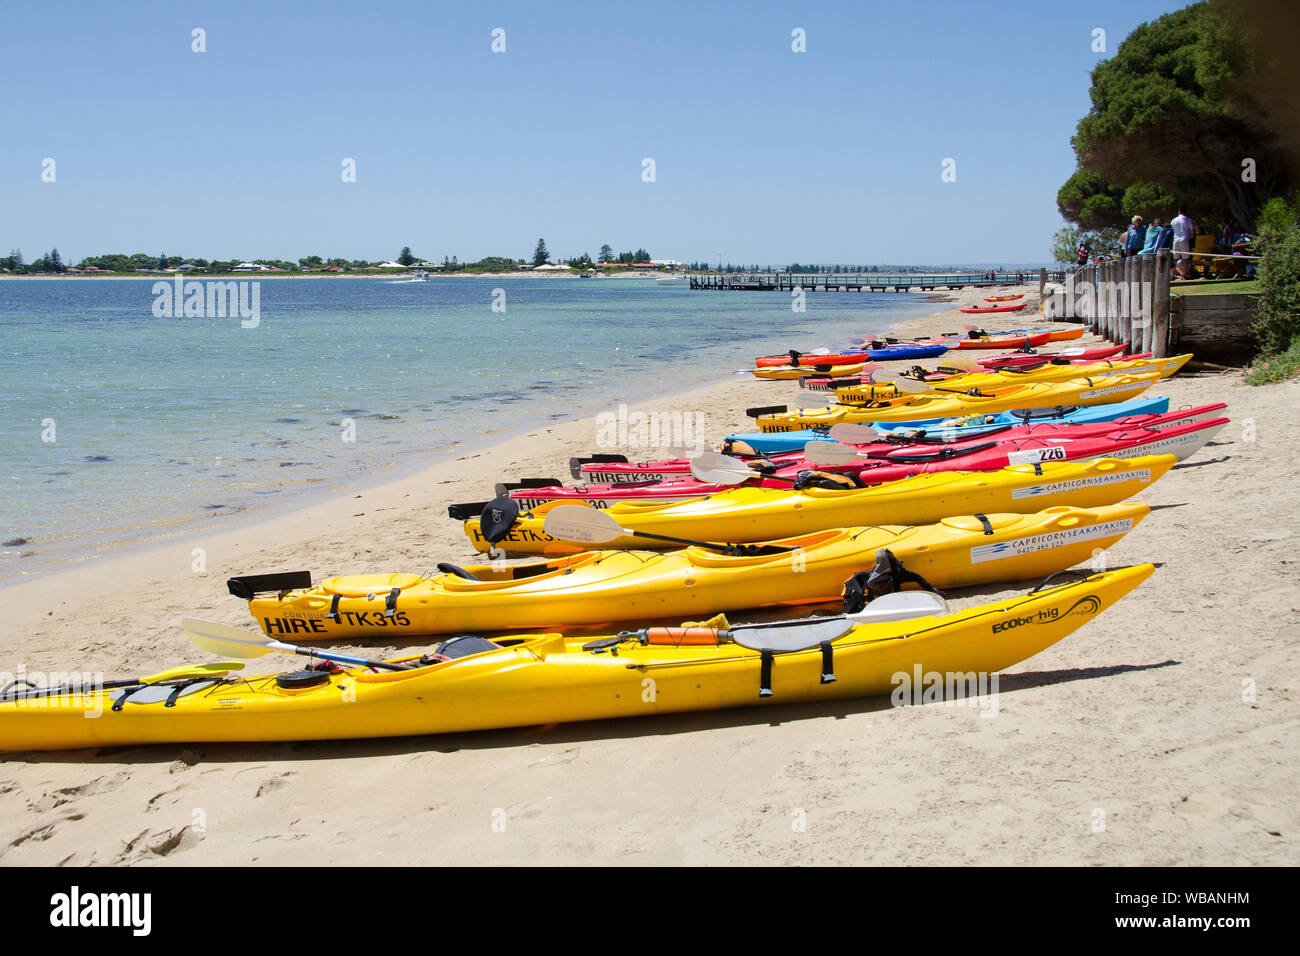 Kayaks hauled up on the beach. Limestone reefs, rocks and islets support a rich diversity and abundance of marine and terrestrial wildlife making the Stock Photo